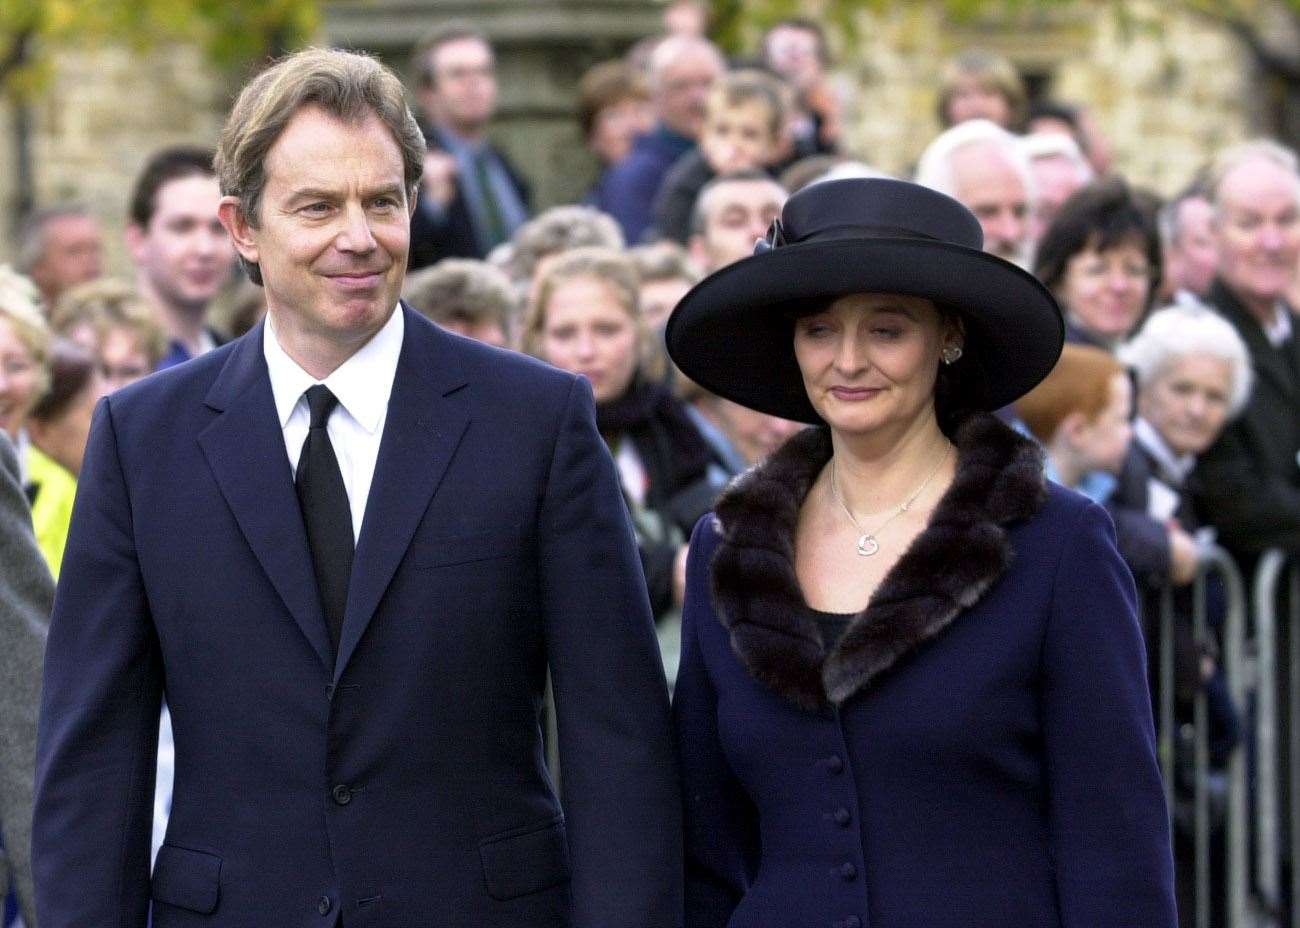 Tony and Cherie Blair were among the attendees at Donald Dewar’s funeral (Ben Curtis/PA)